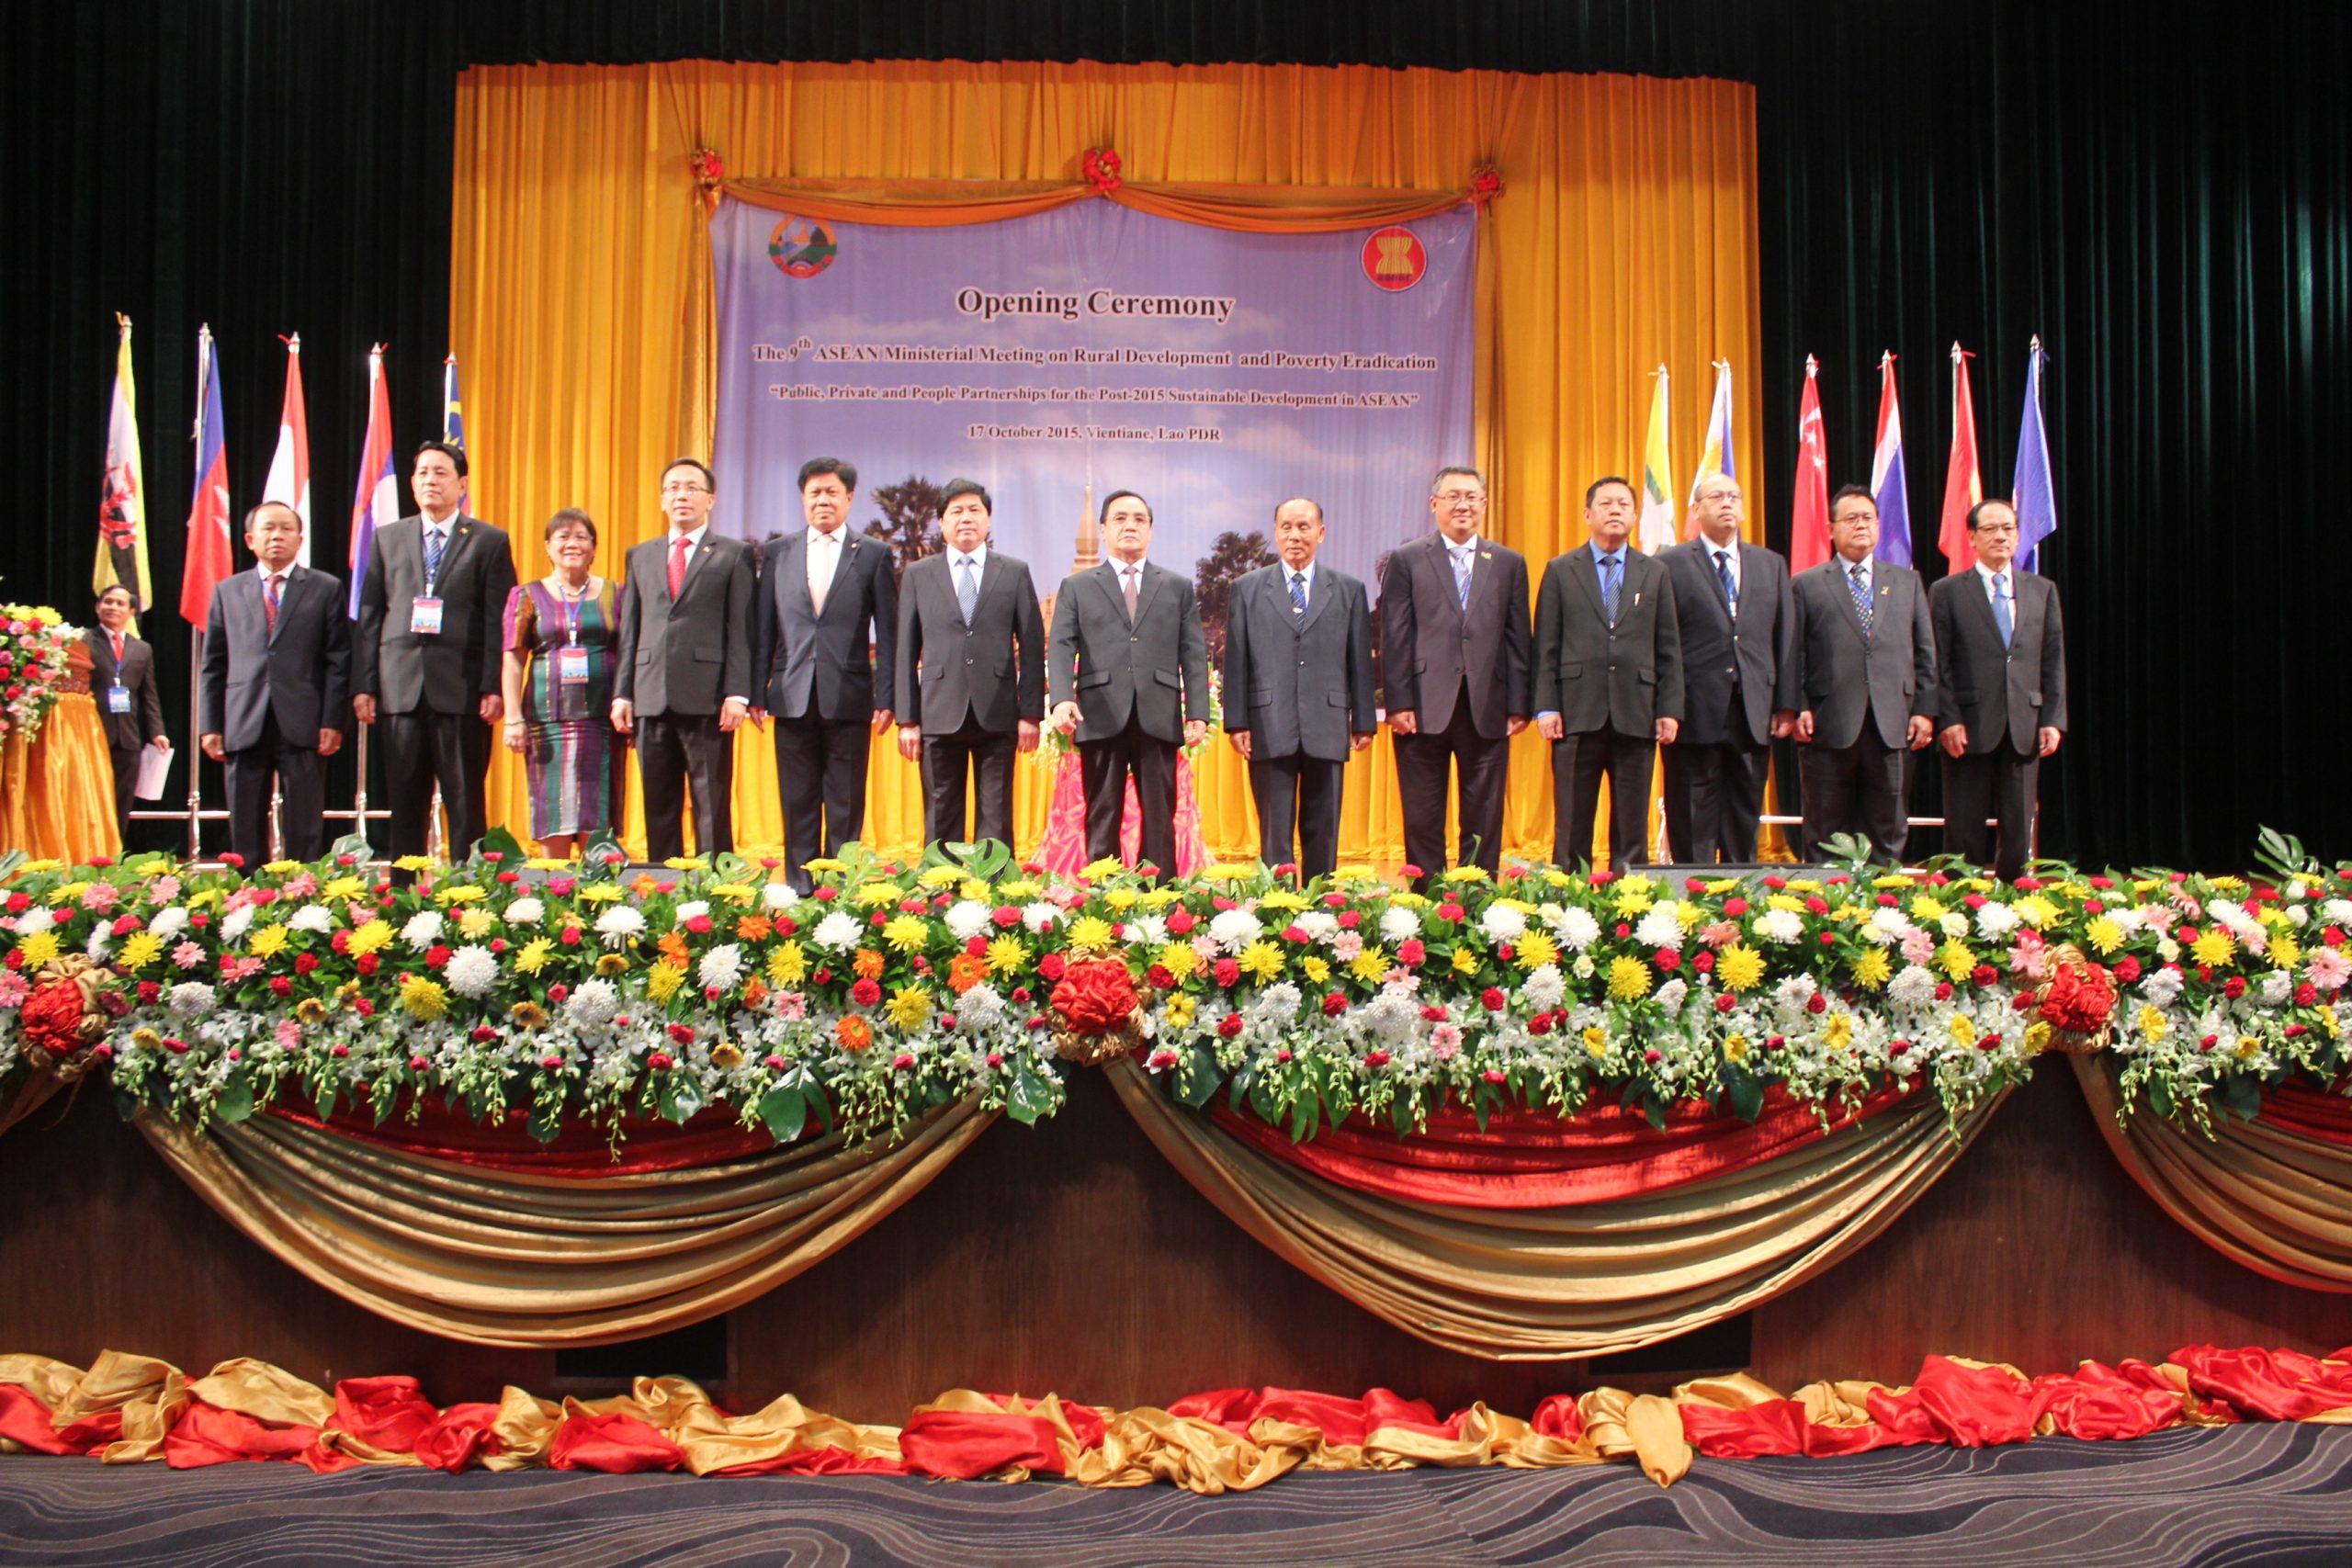 Joint Statement The Ninth Asean Ministers Meeting On Rural Development And Poverty Eradication Amrdpe Asean